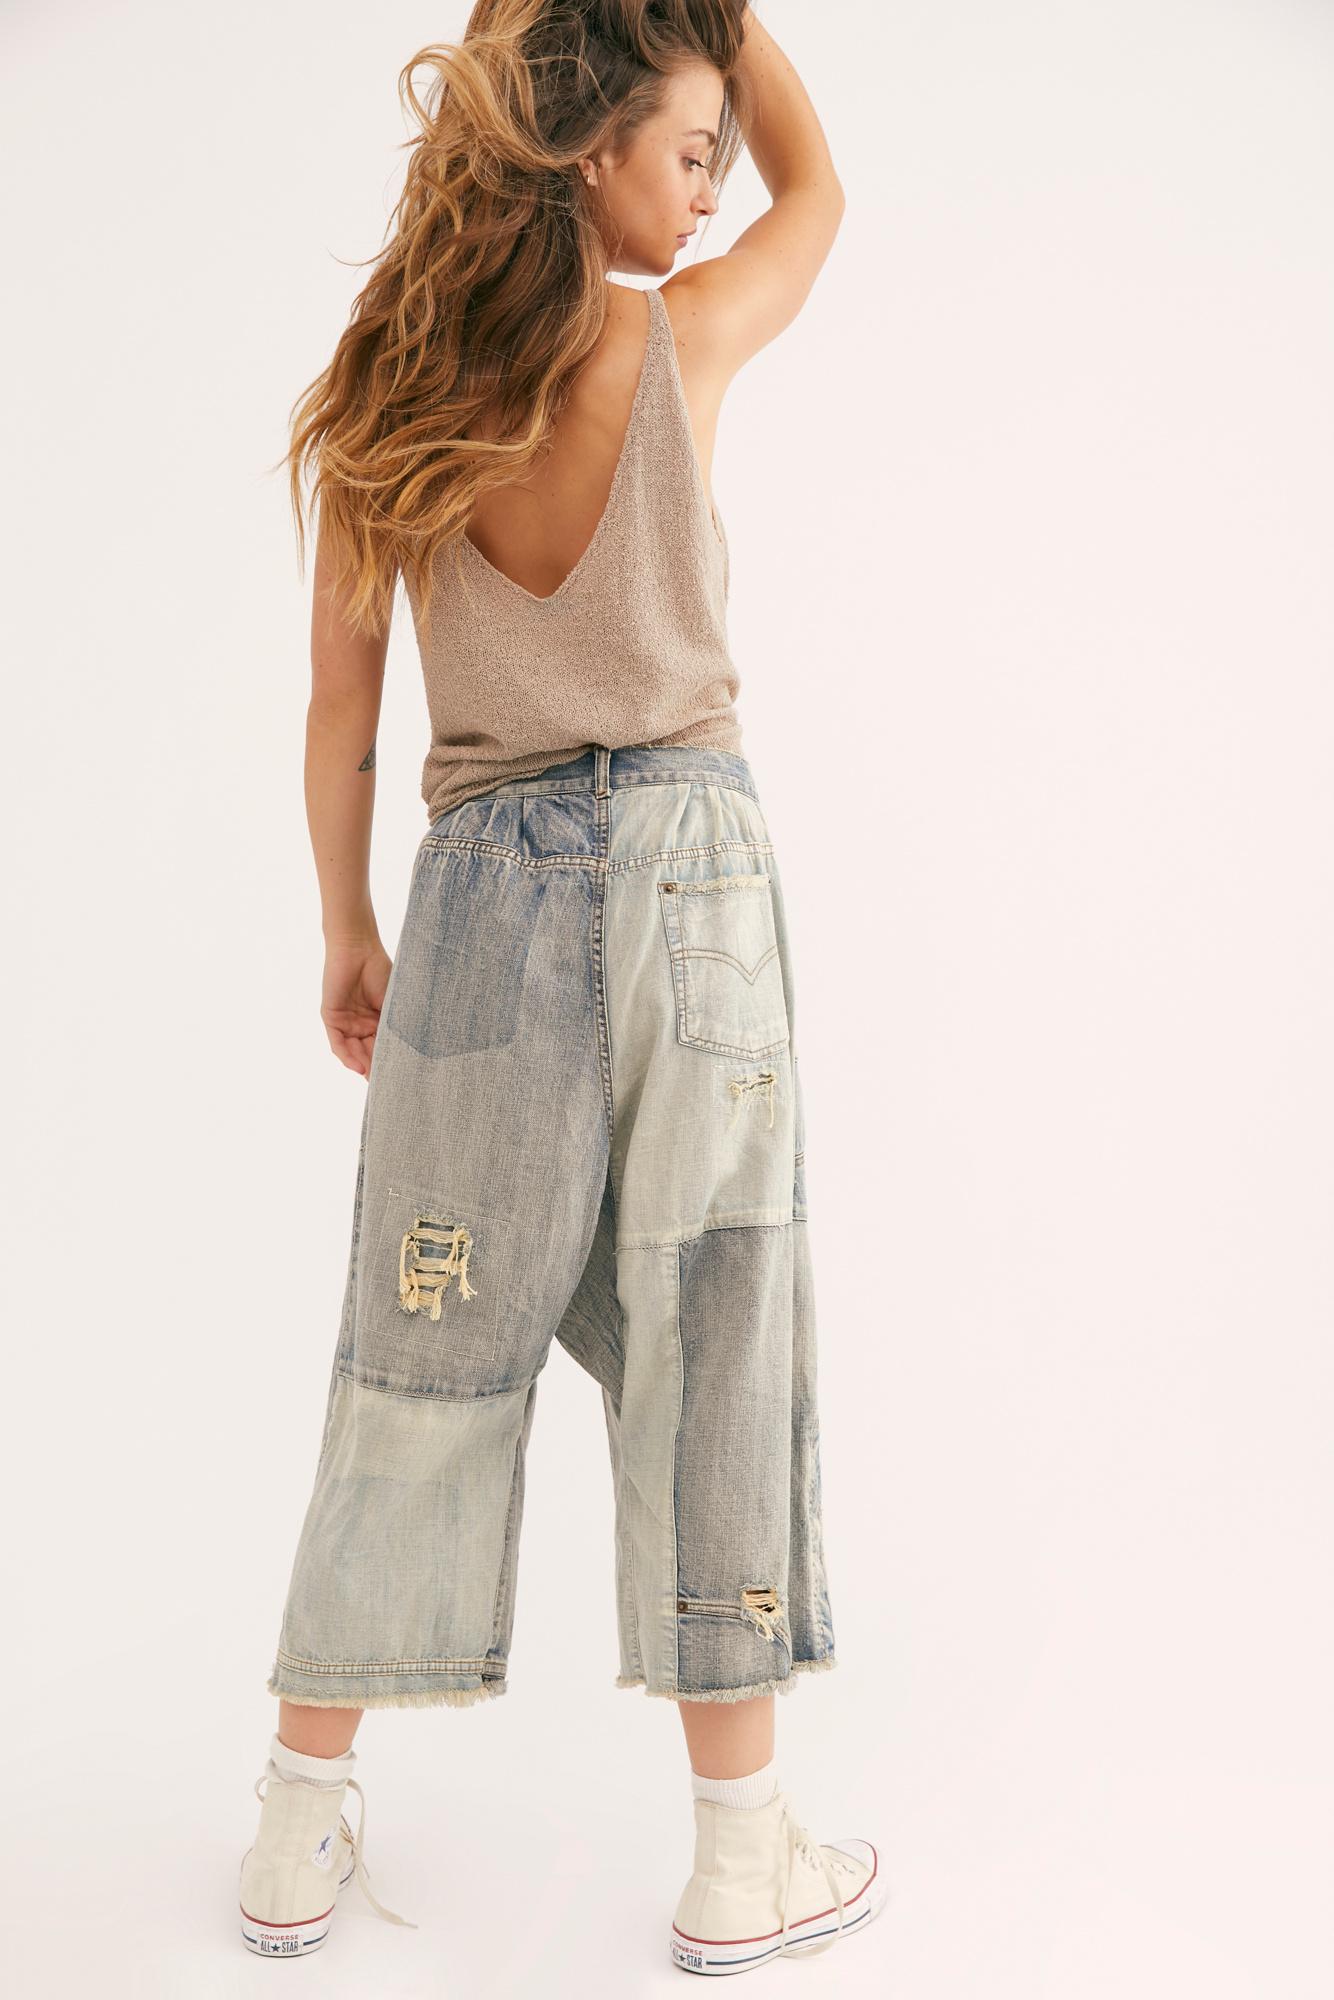 Free People Magnolia Pearl Beck Jeans | Lyst